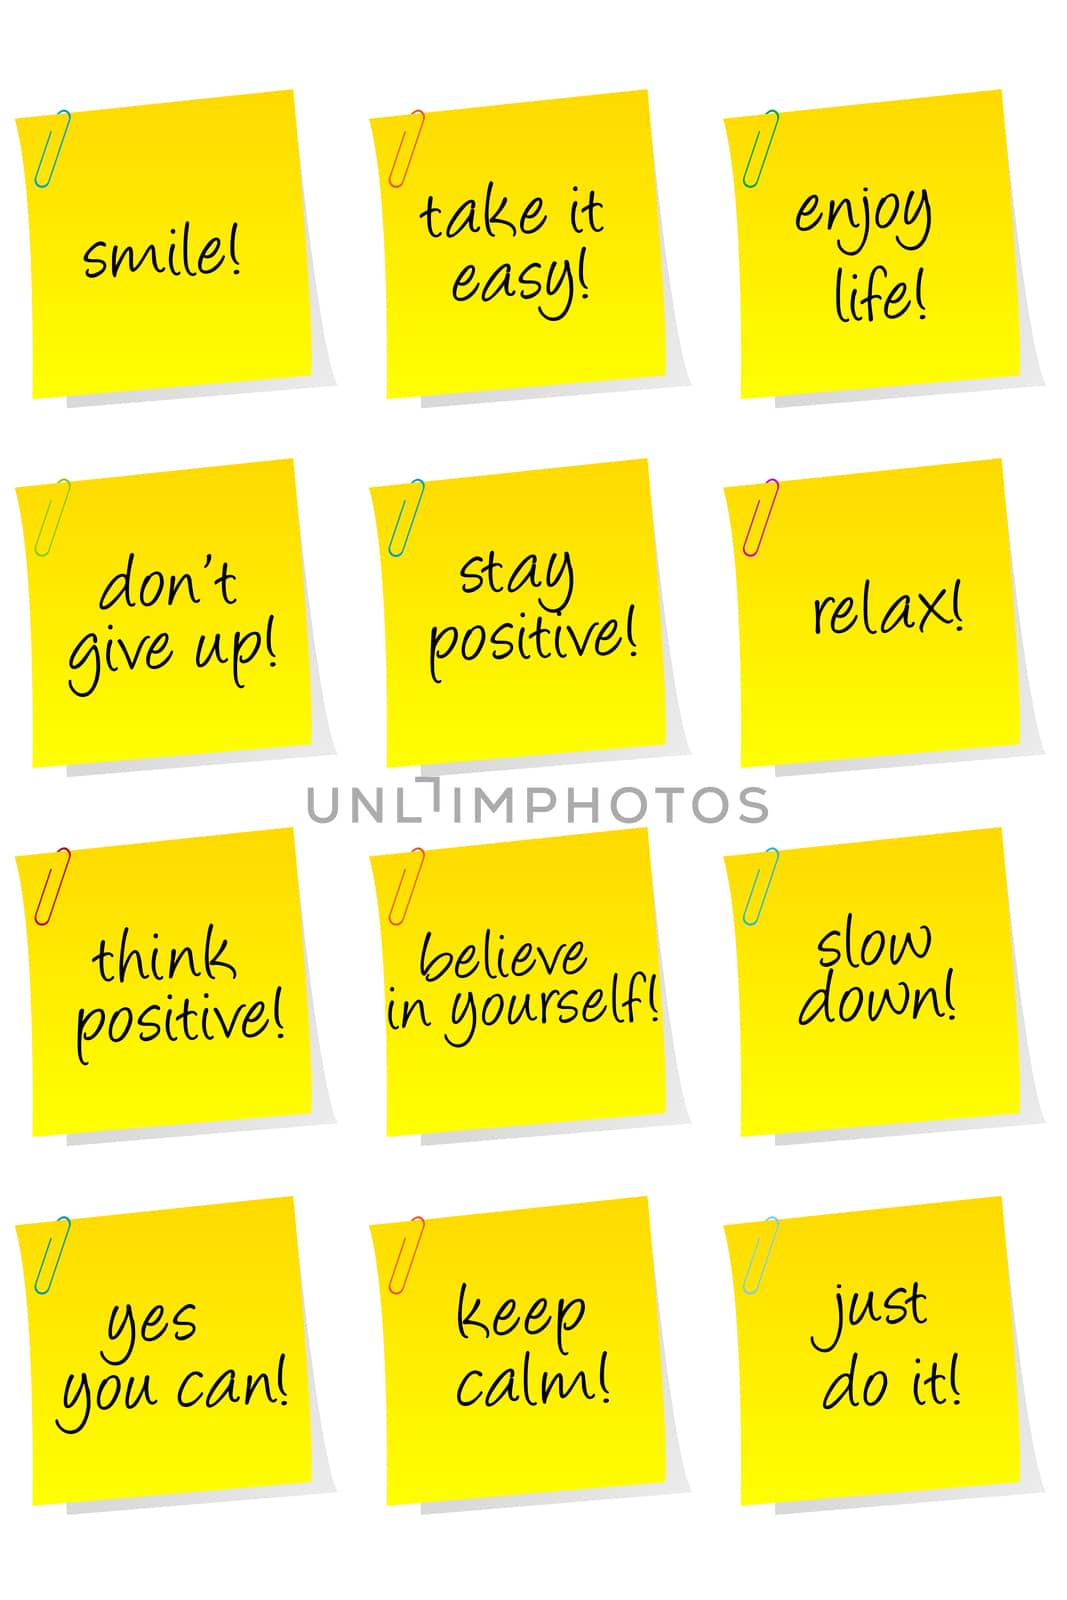 Set of sheets of paper with motivational and positive thinking messages